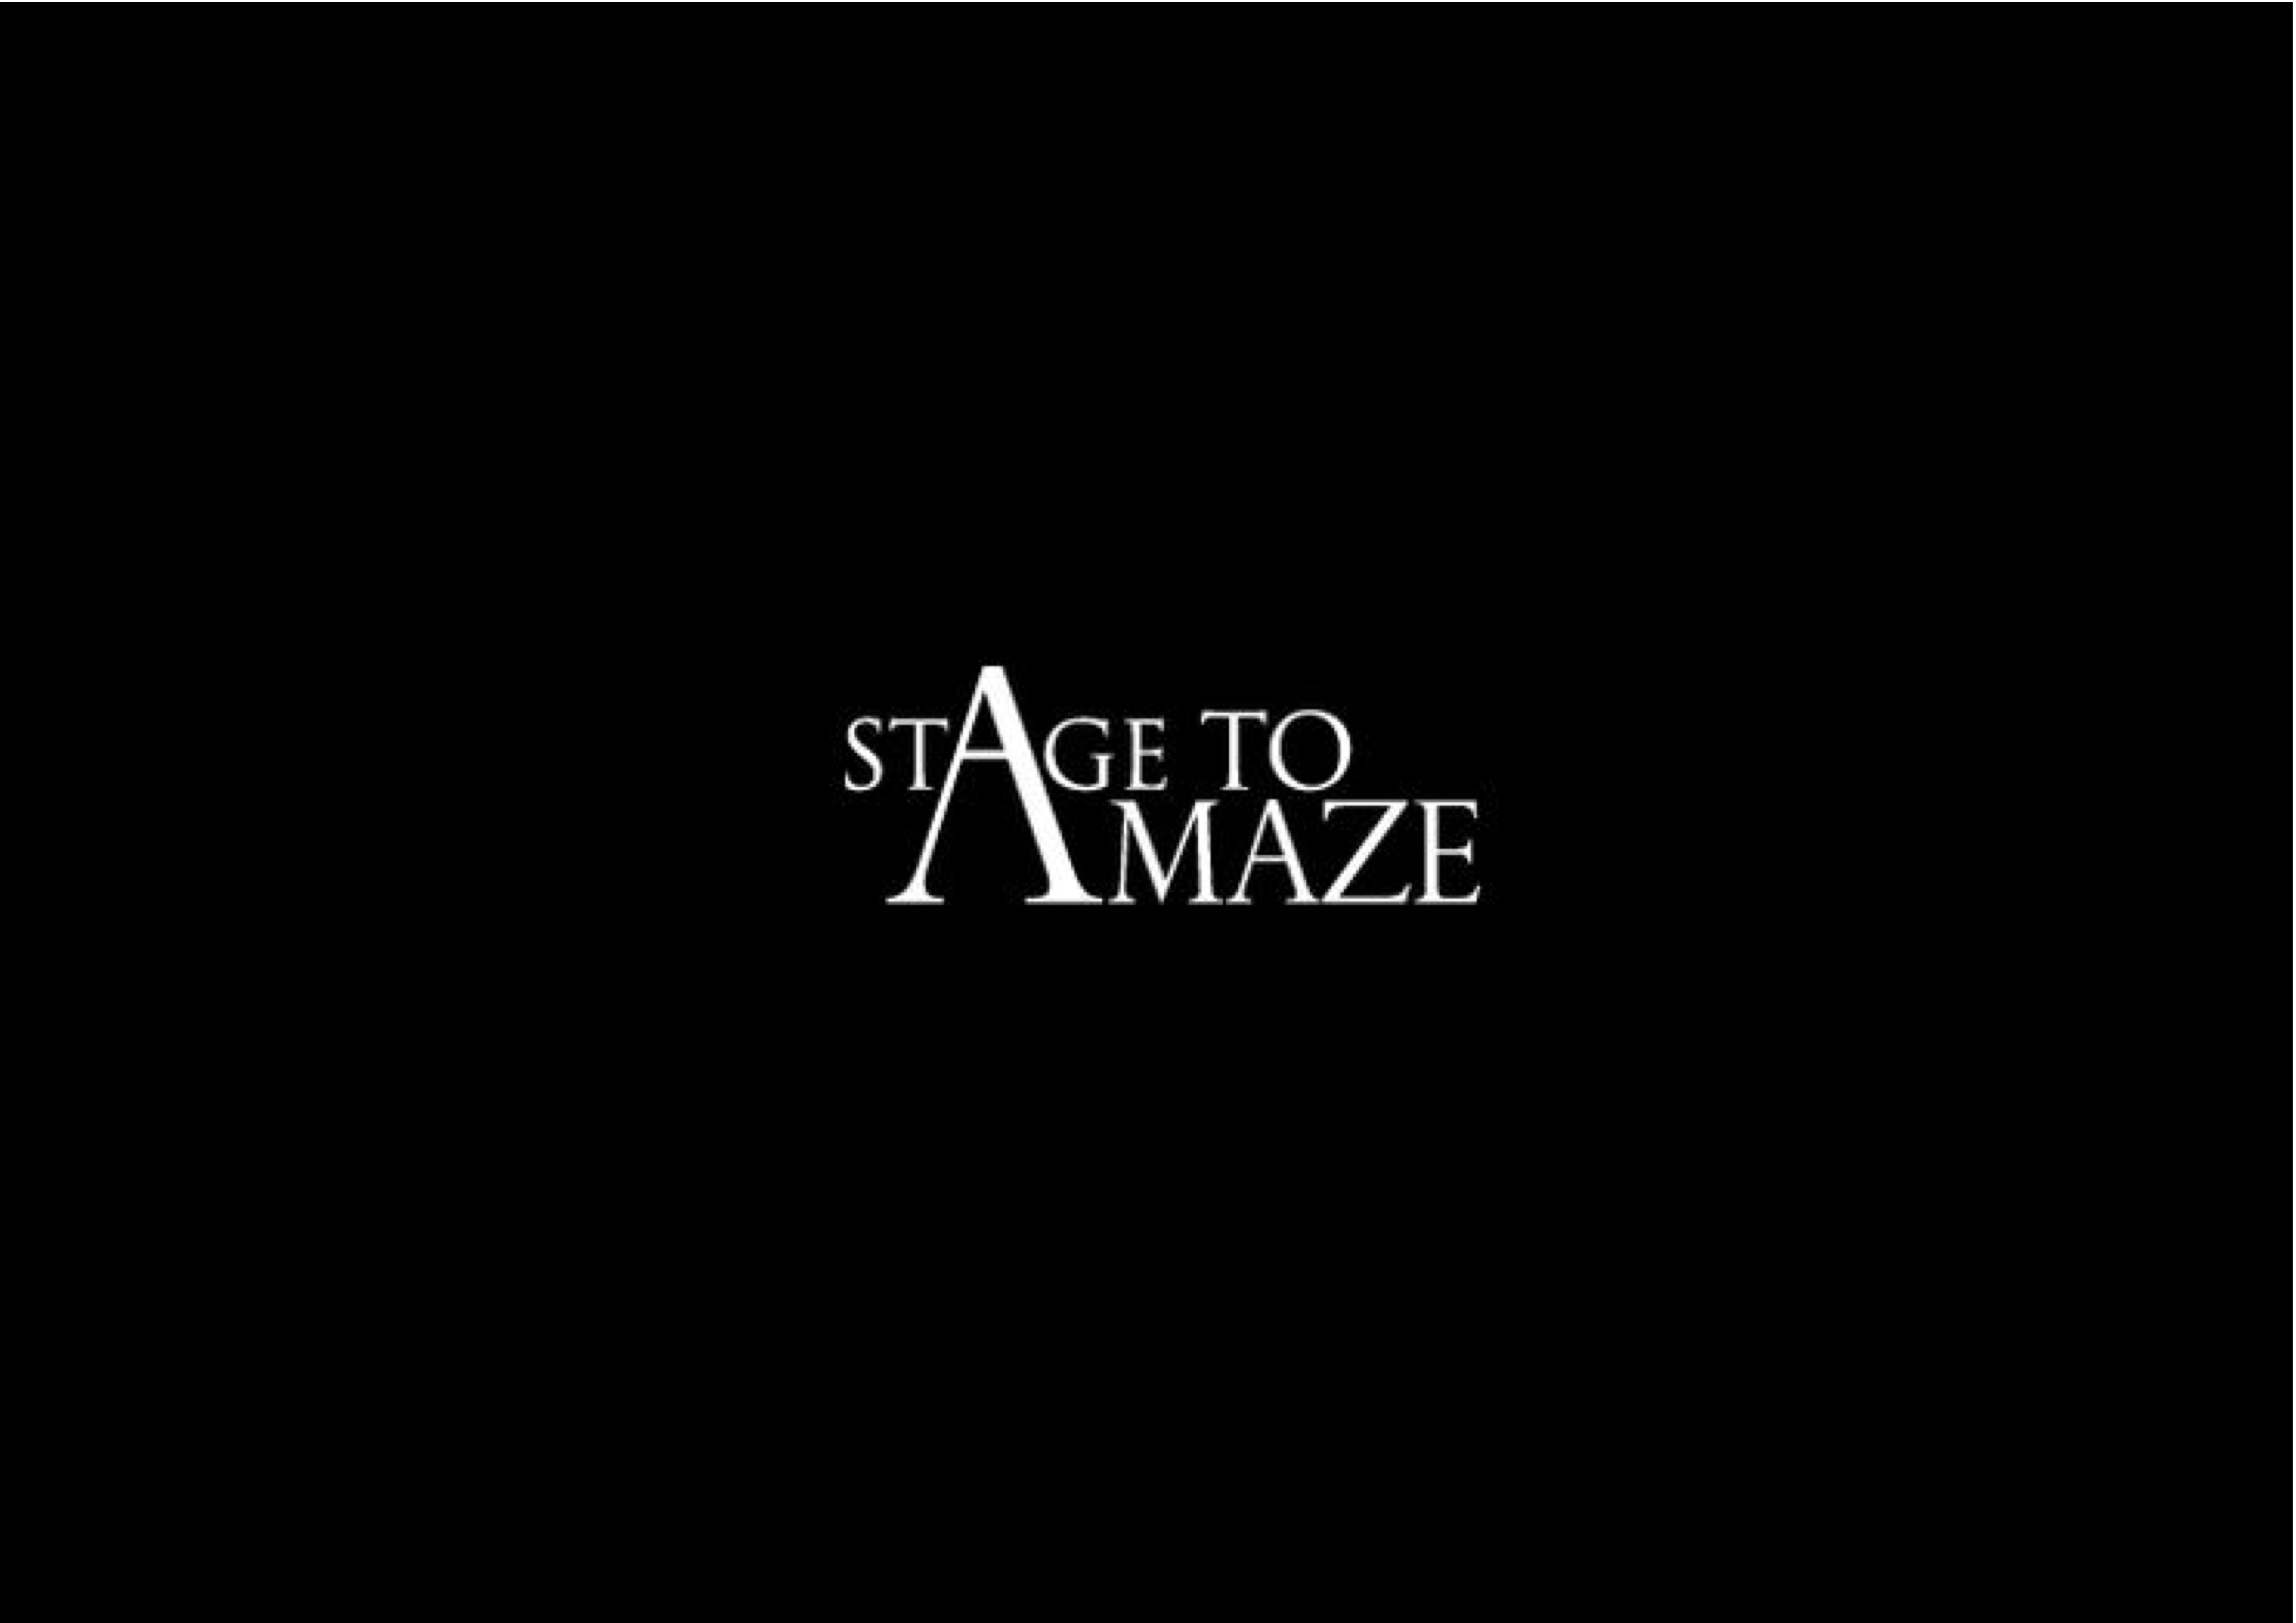 A black and white image of the logo for stage to amaze.